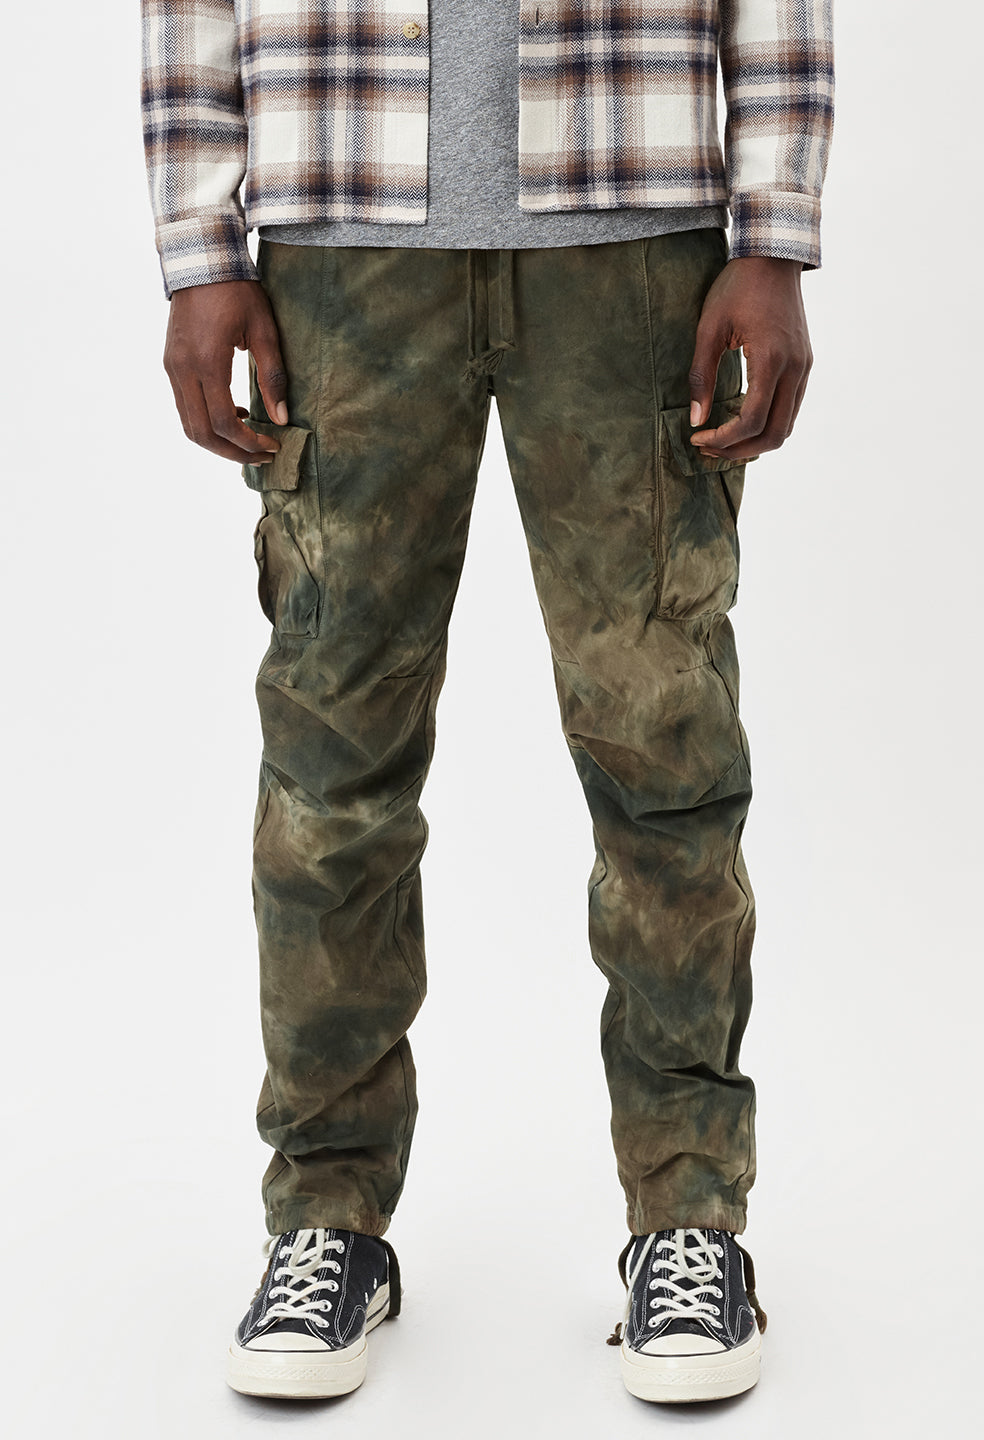 John Elliott on Twitter Himalayan Cargo Pants in Olive Navy and Black  10 of proceeds will be donated to UCLA Health Fund Available now  httpstcoF9fYx4iVZB httpstcou2dP0mkMsy  Twitter